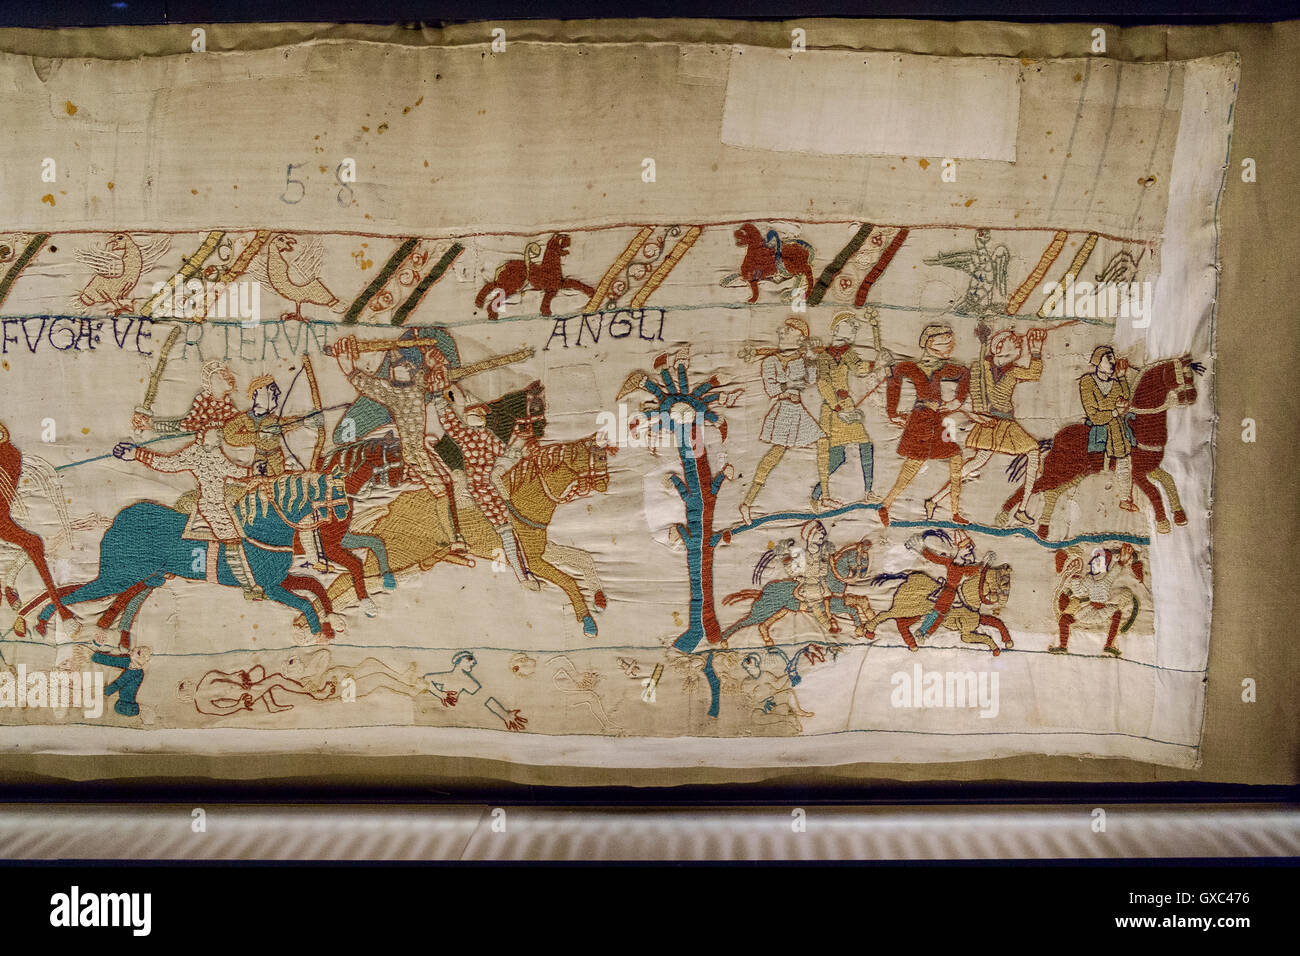 bayeux tapestry close up detail Stock Photo